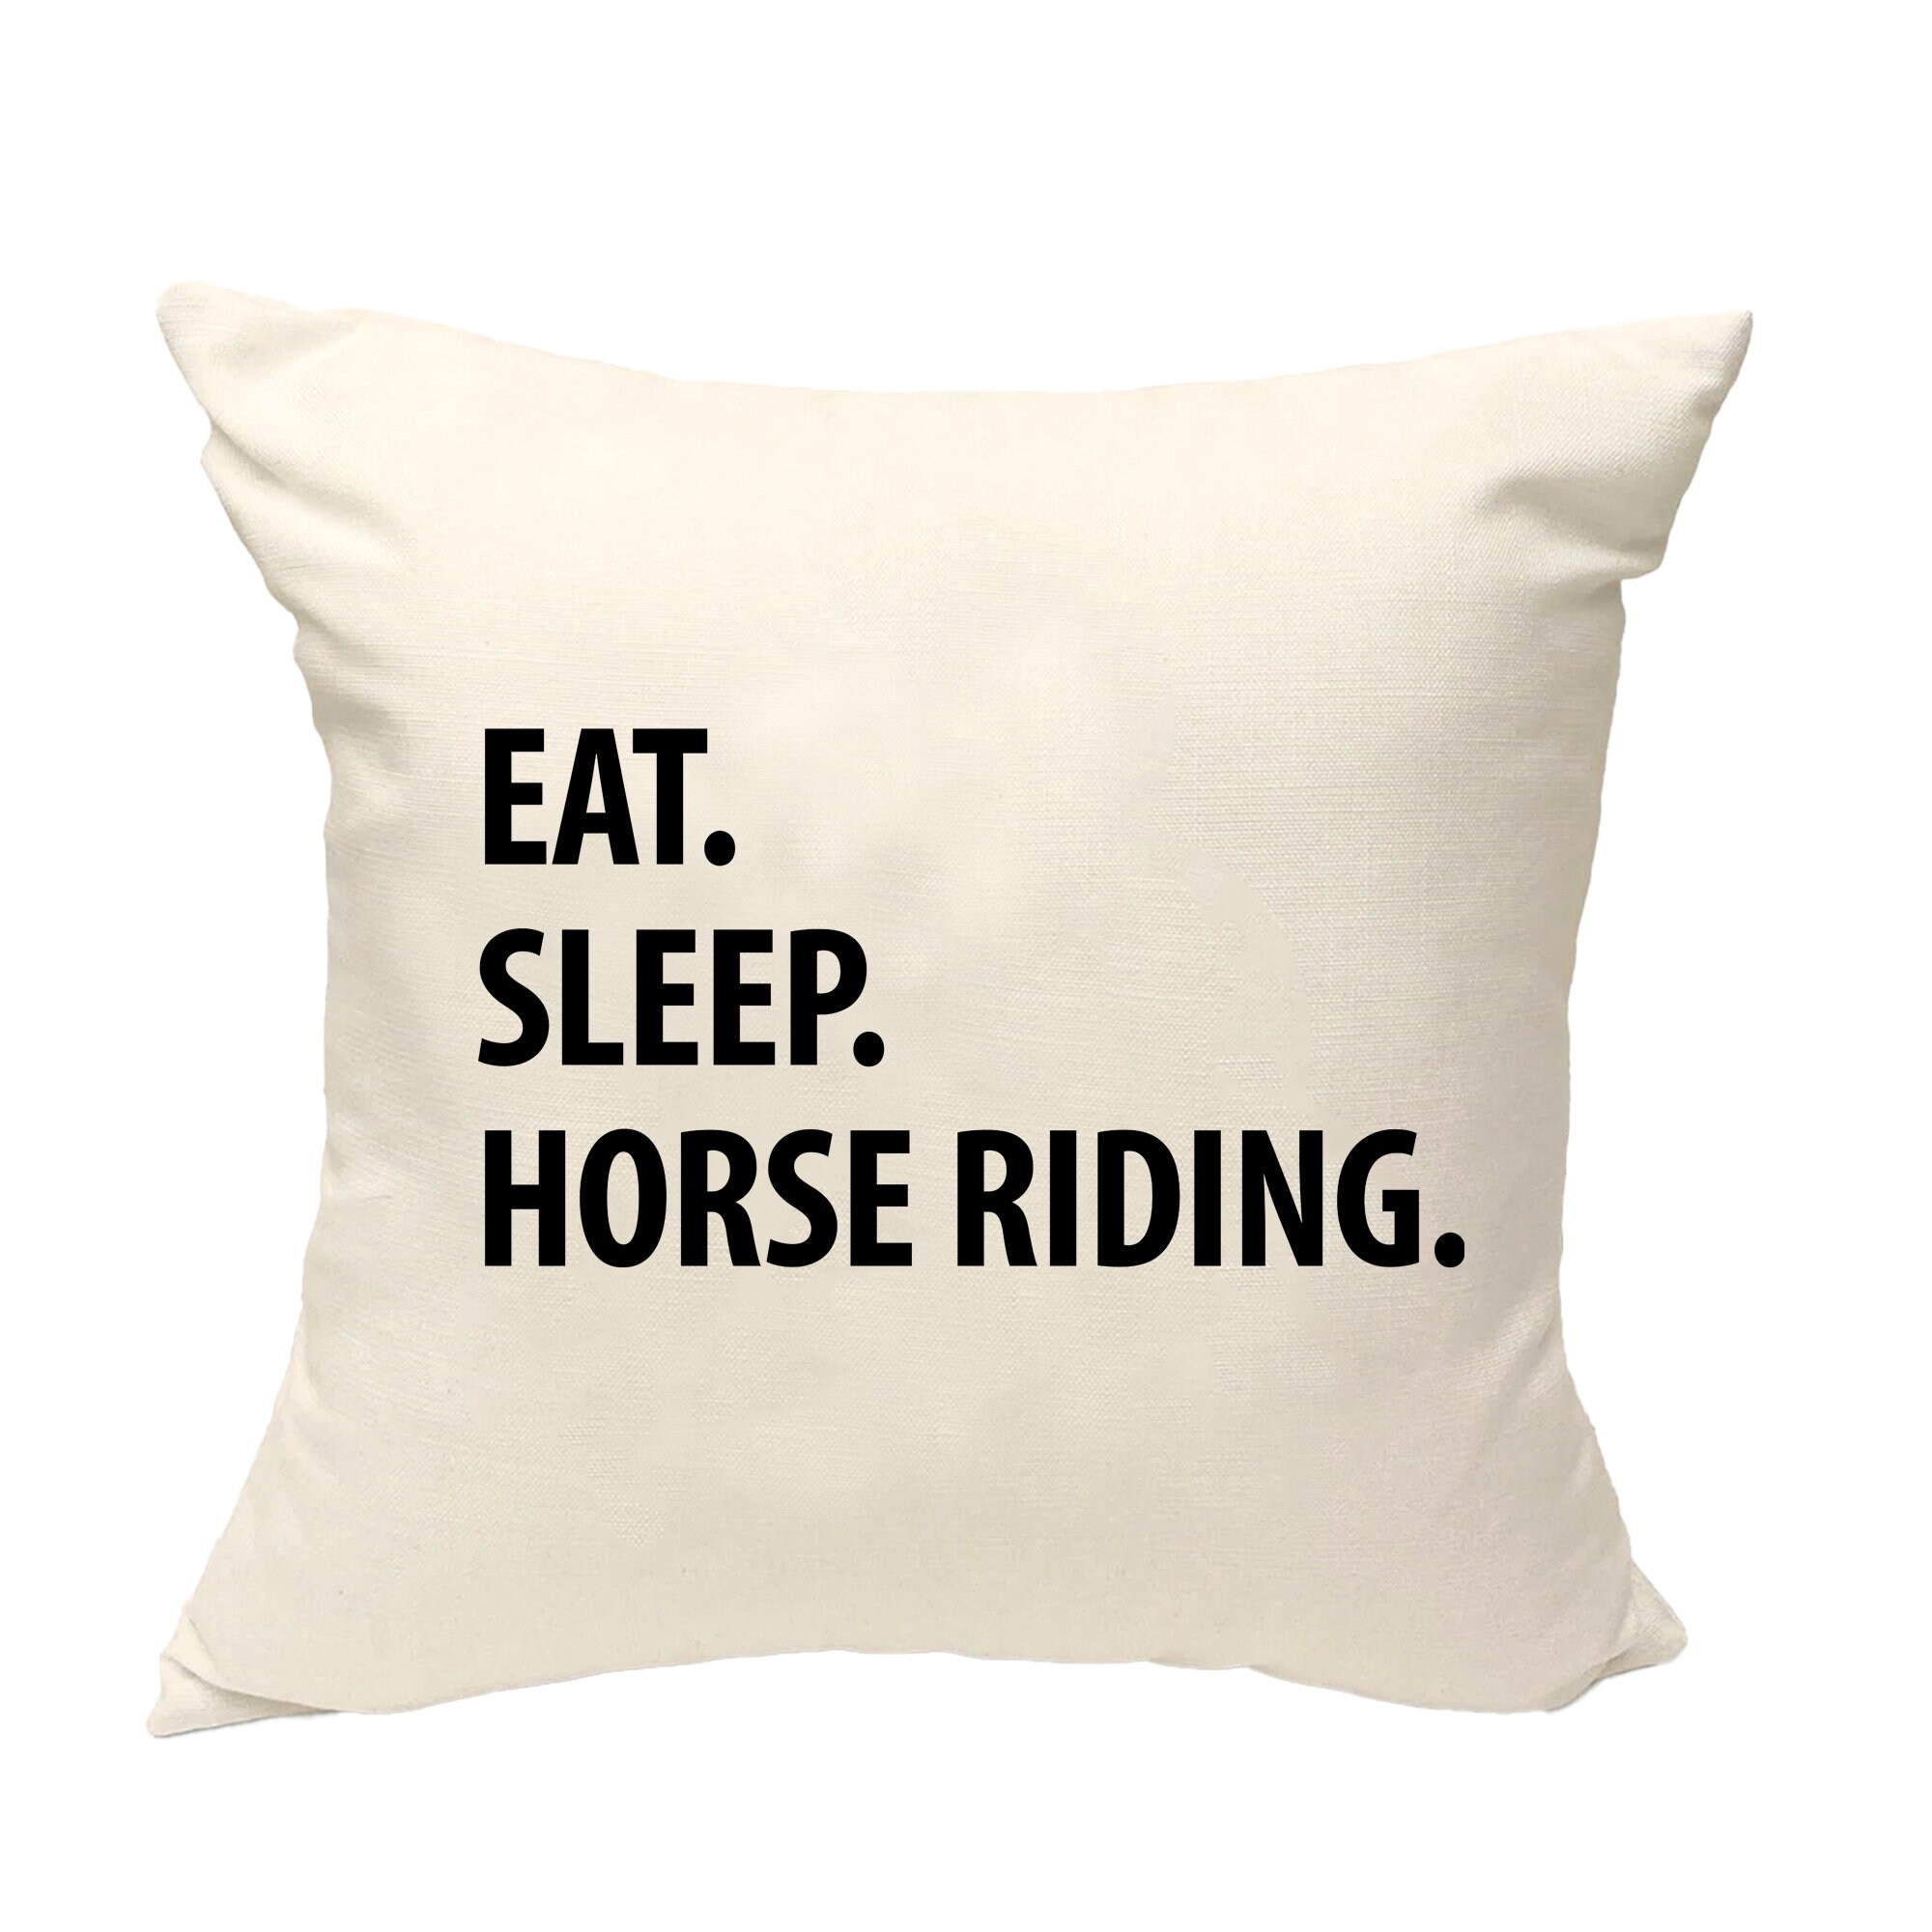 Ride on pillow